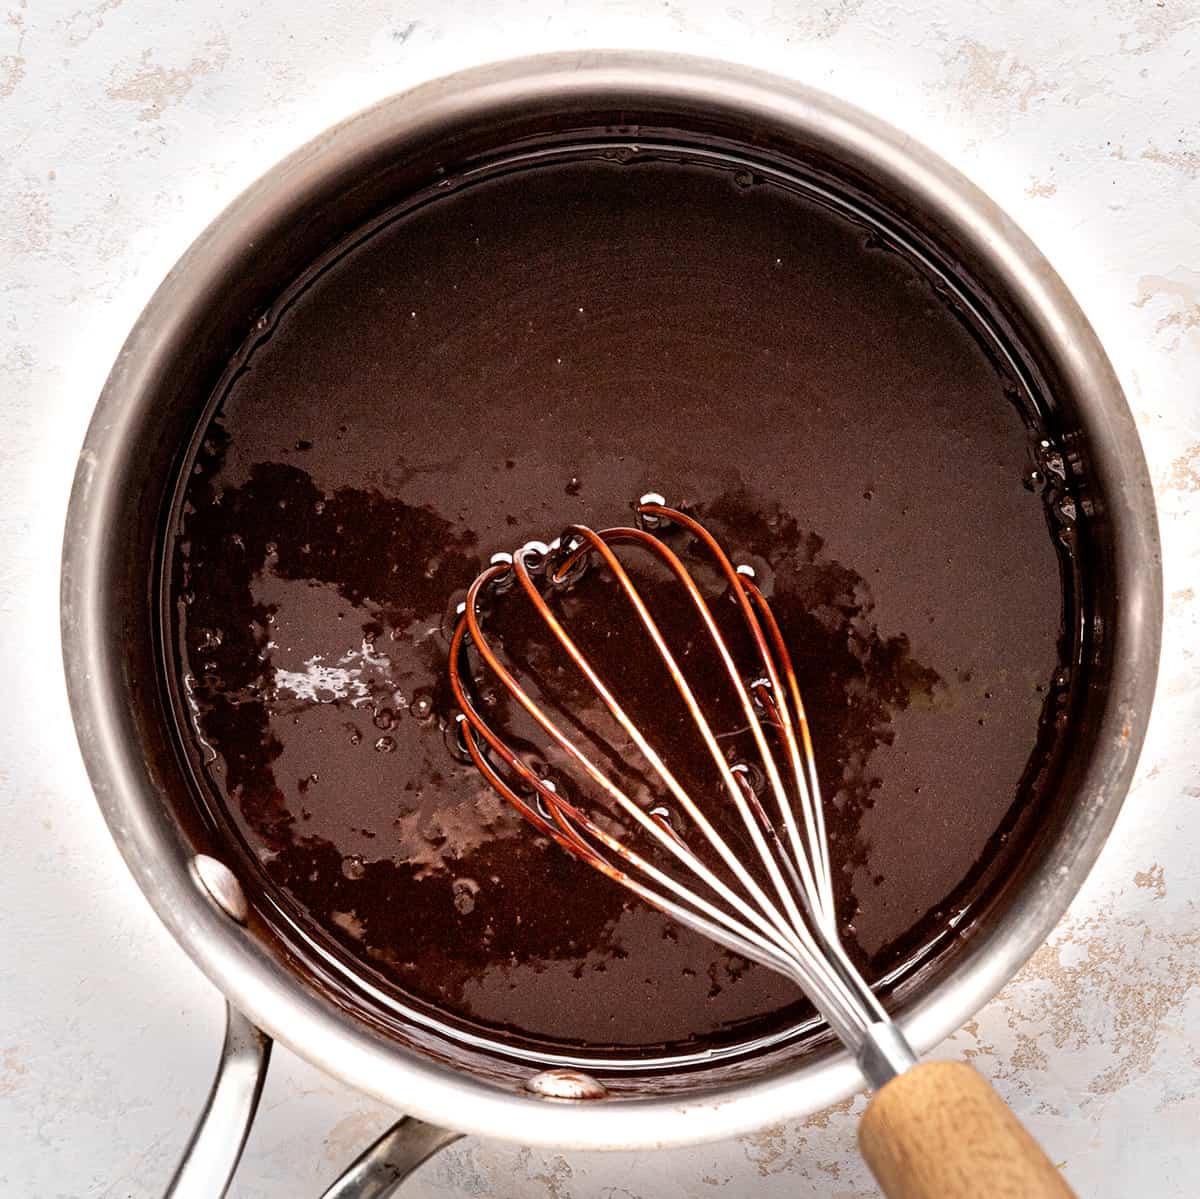 How to Make Chocolate Sauce - whisking ingredients until smooth